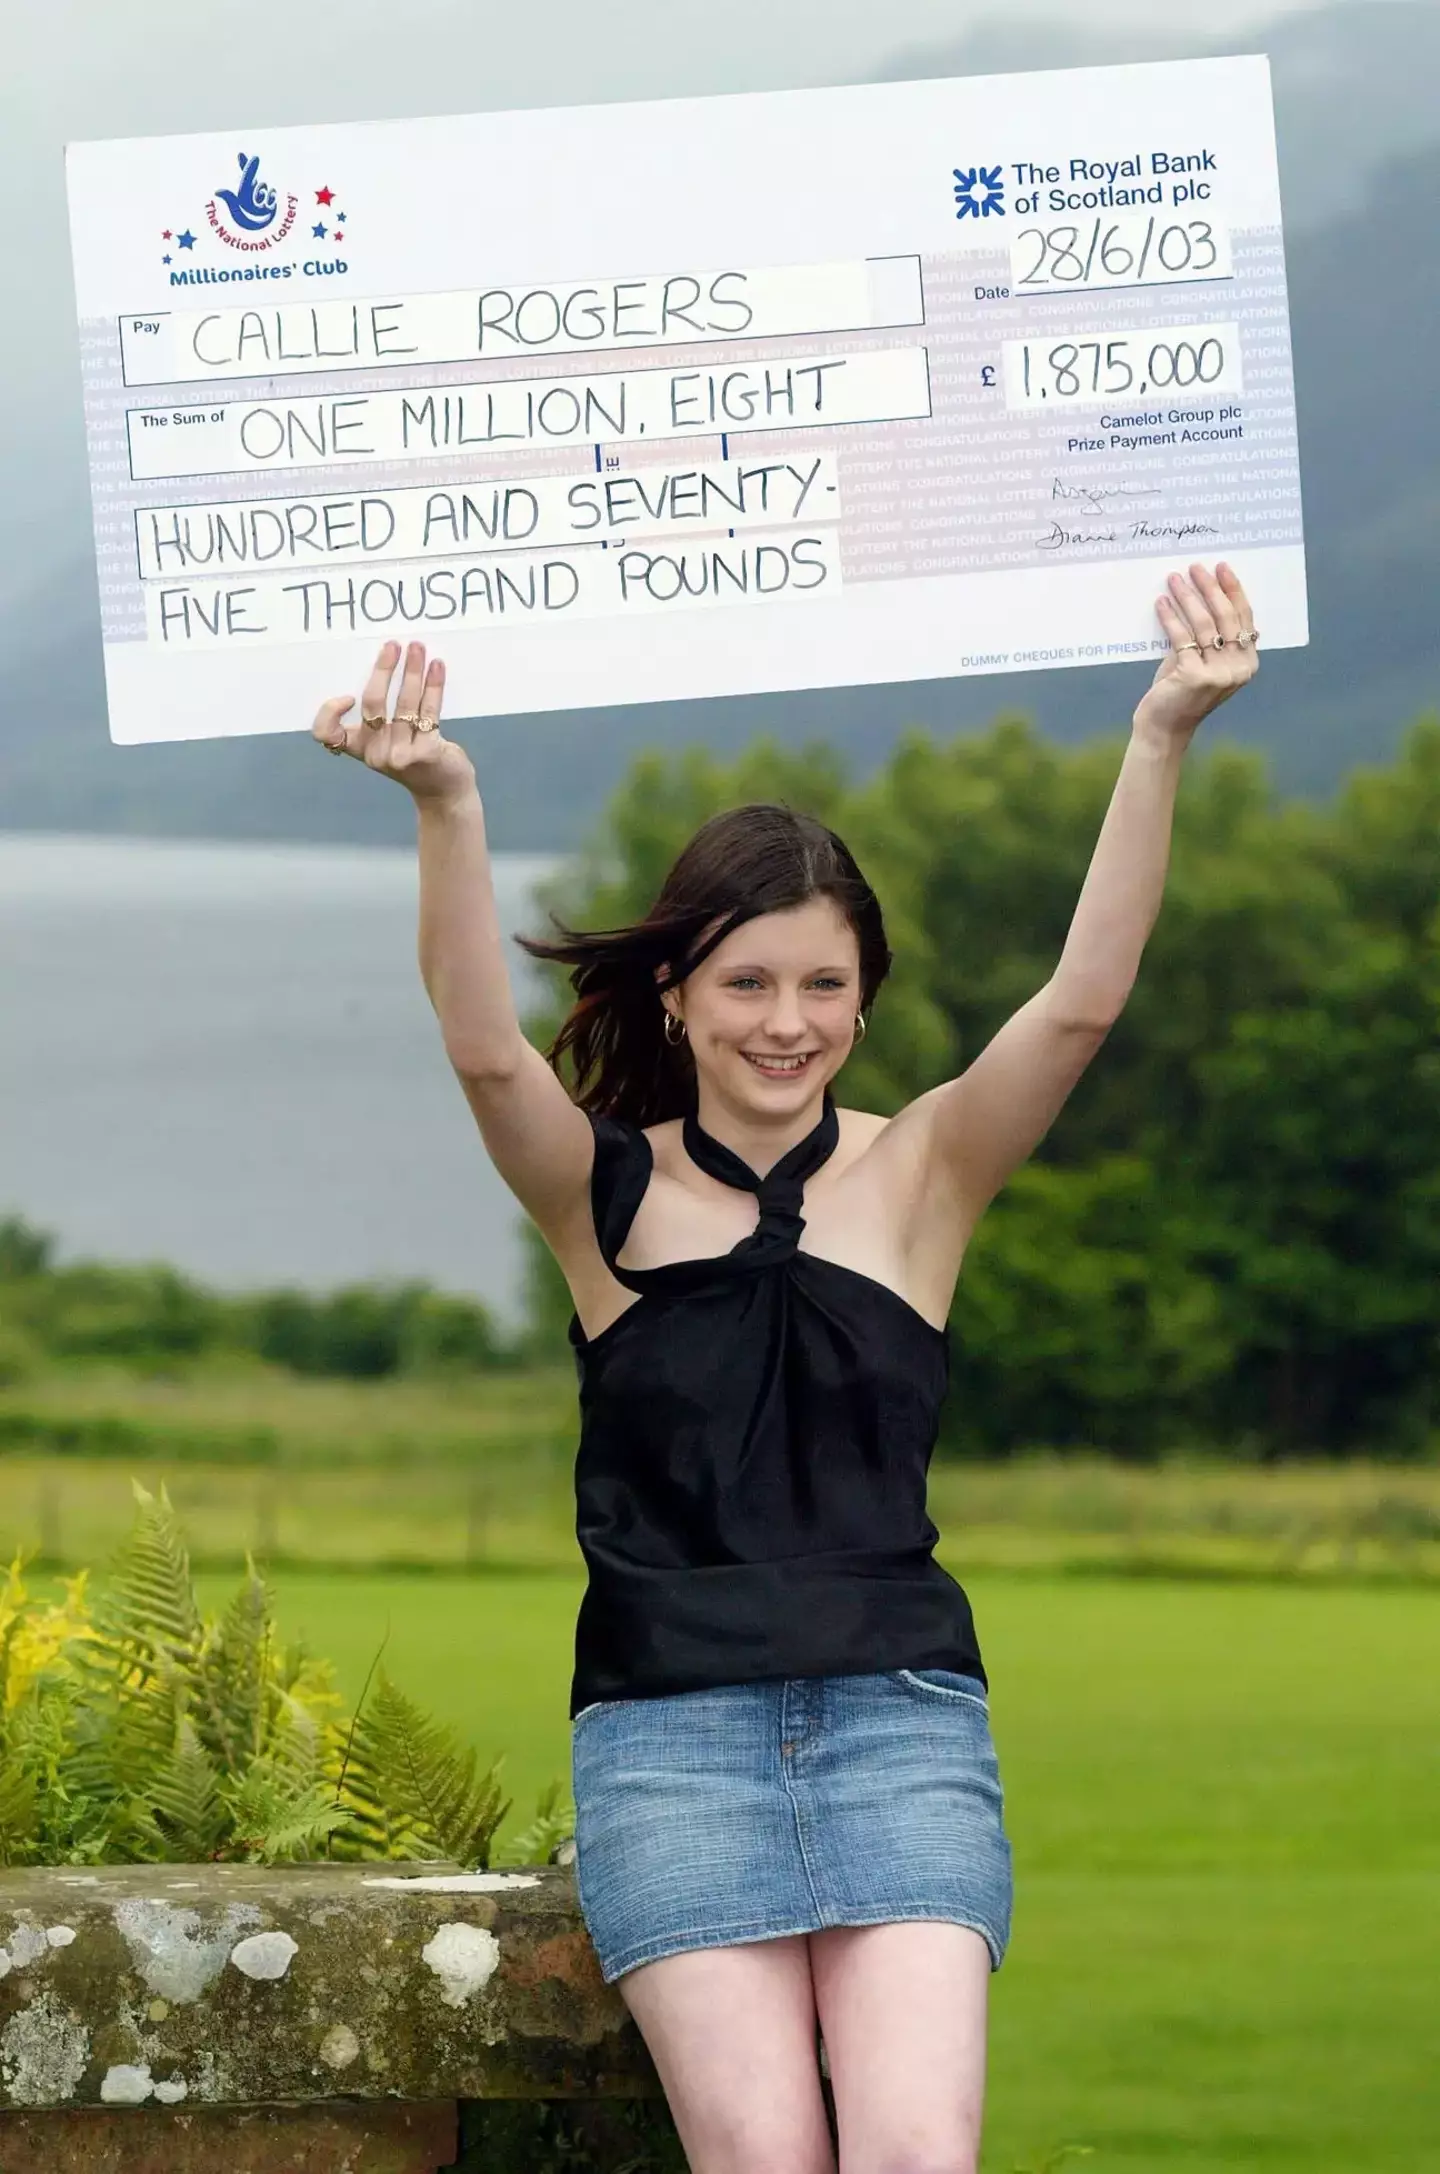 Callie Rogers became the youngest person to win the lottery, at just 16.